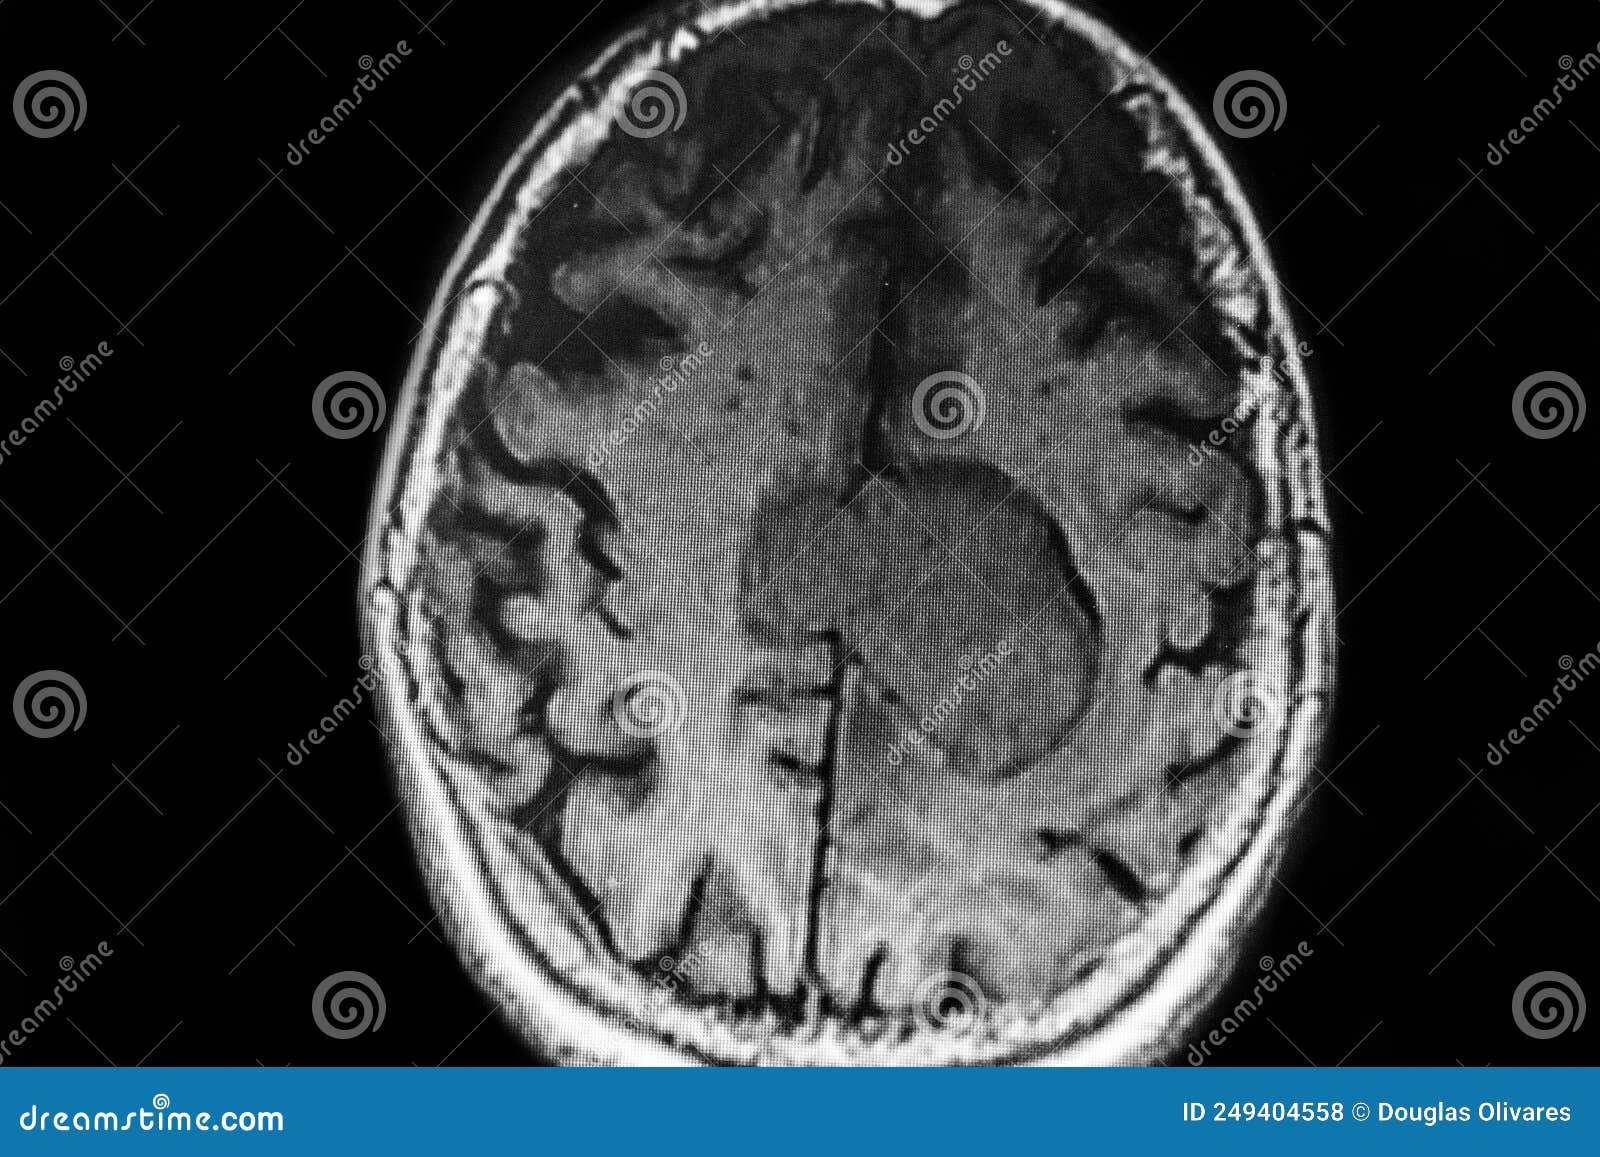 mri image of cerebral lesion located in the middle line parietal -frontal area